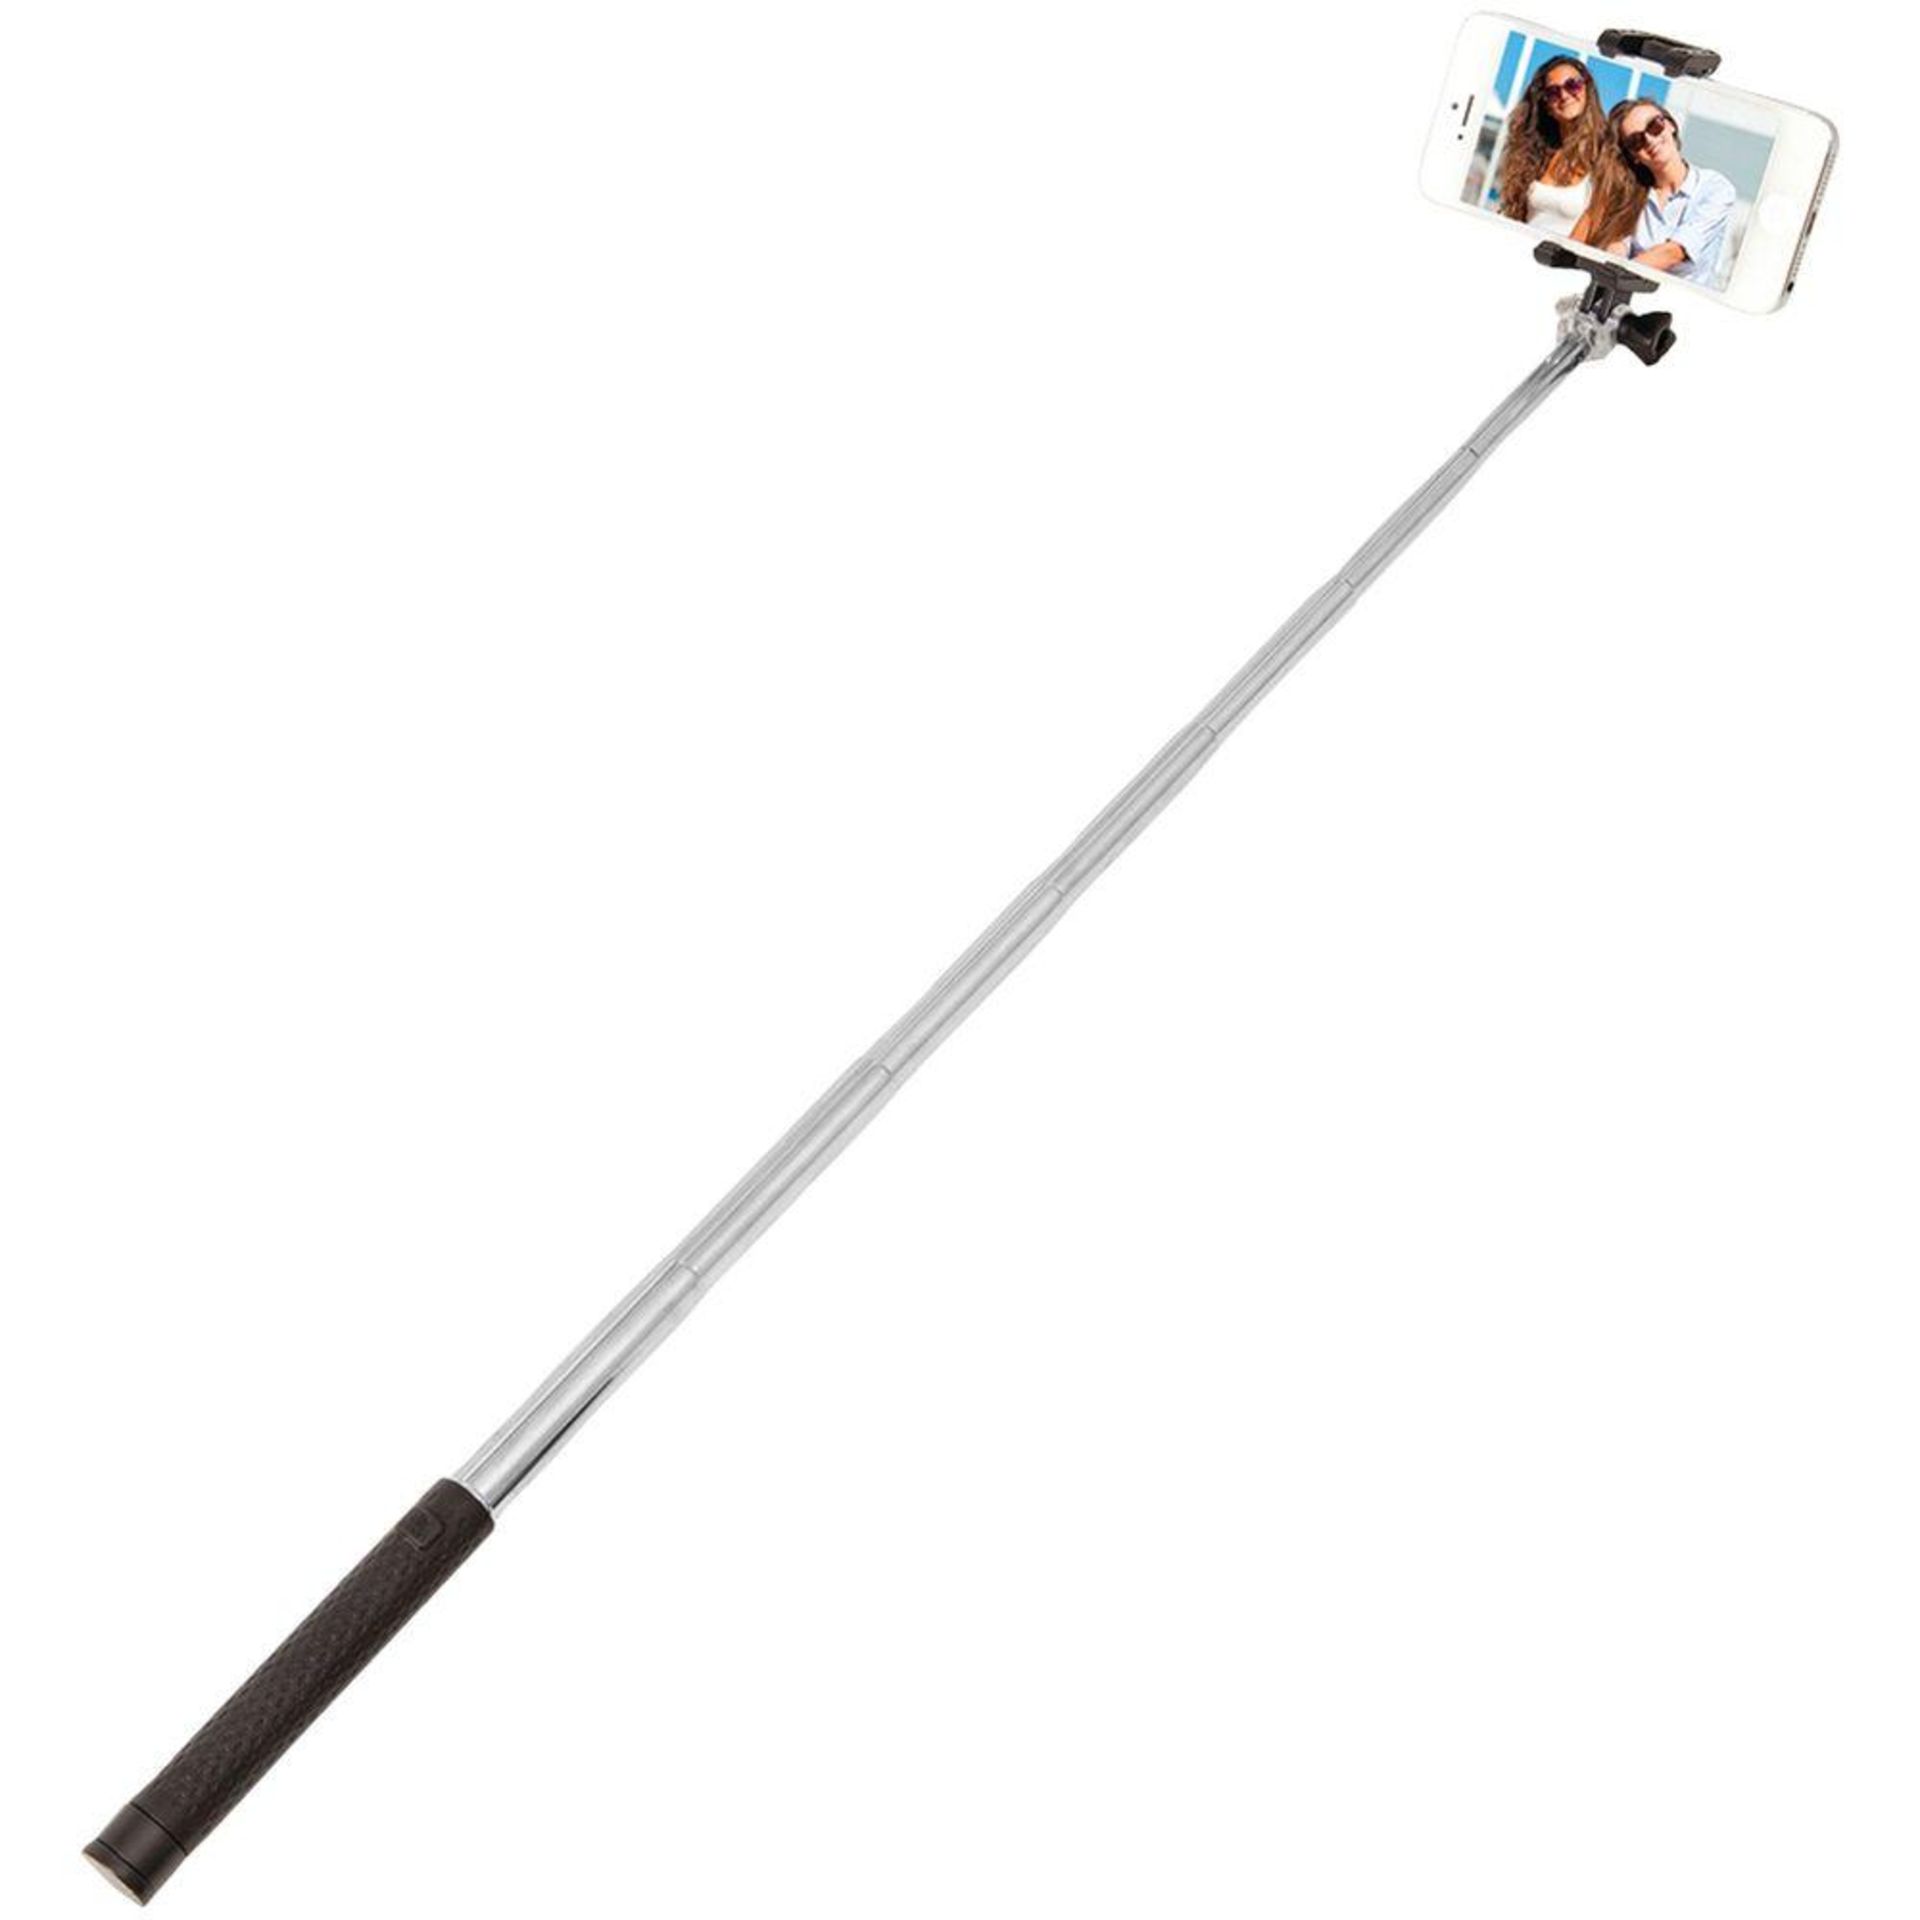 V Brand New Bluetooth Wireless 22cm Telescopic Selfie Stick *Item is similar to picture*